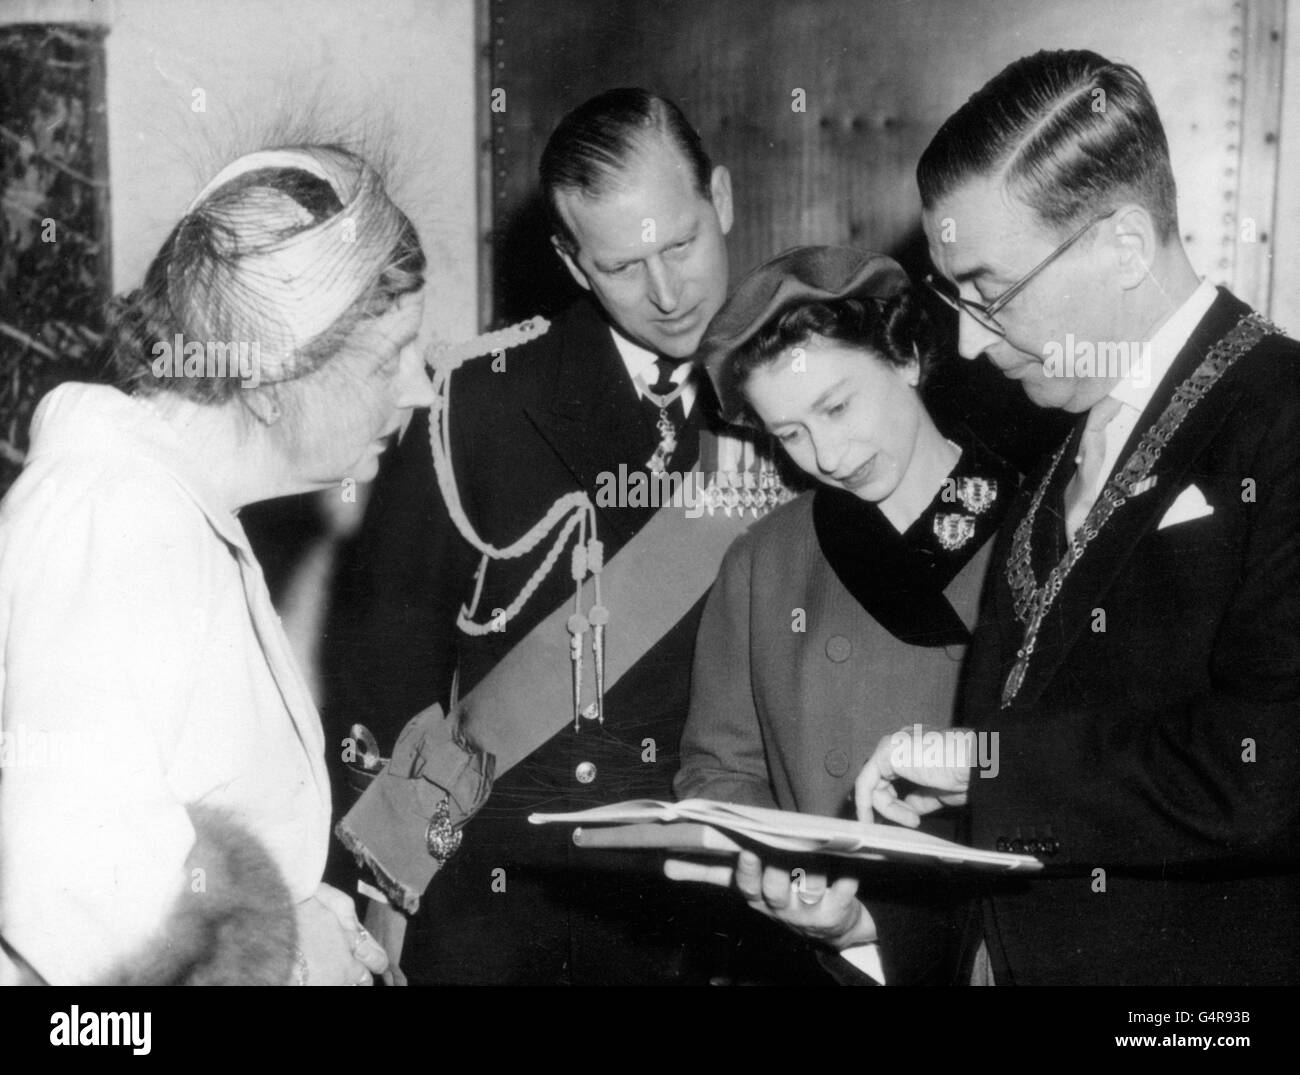 Queen Juliana of the Netherlands watches as the Queen and Duke of Edinburgh are shown a book by the Burgomaster, Mr G van Hall, in Amsterdam Stock Photo